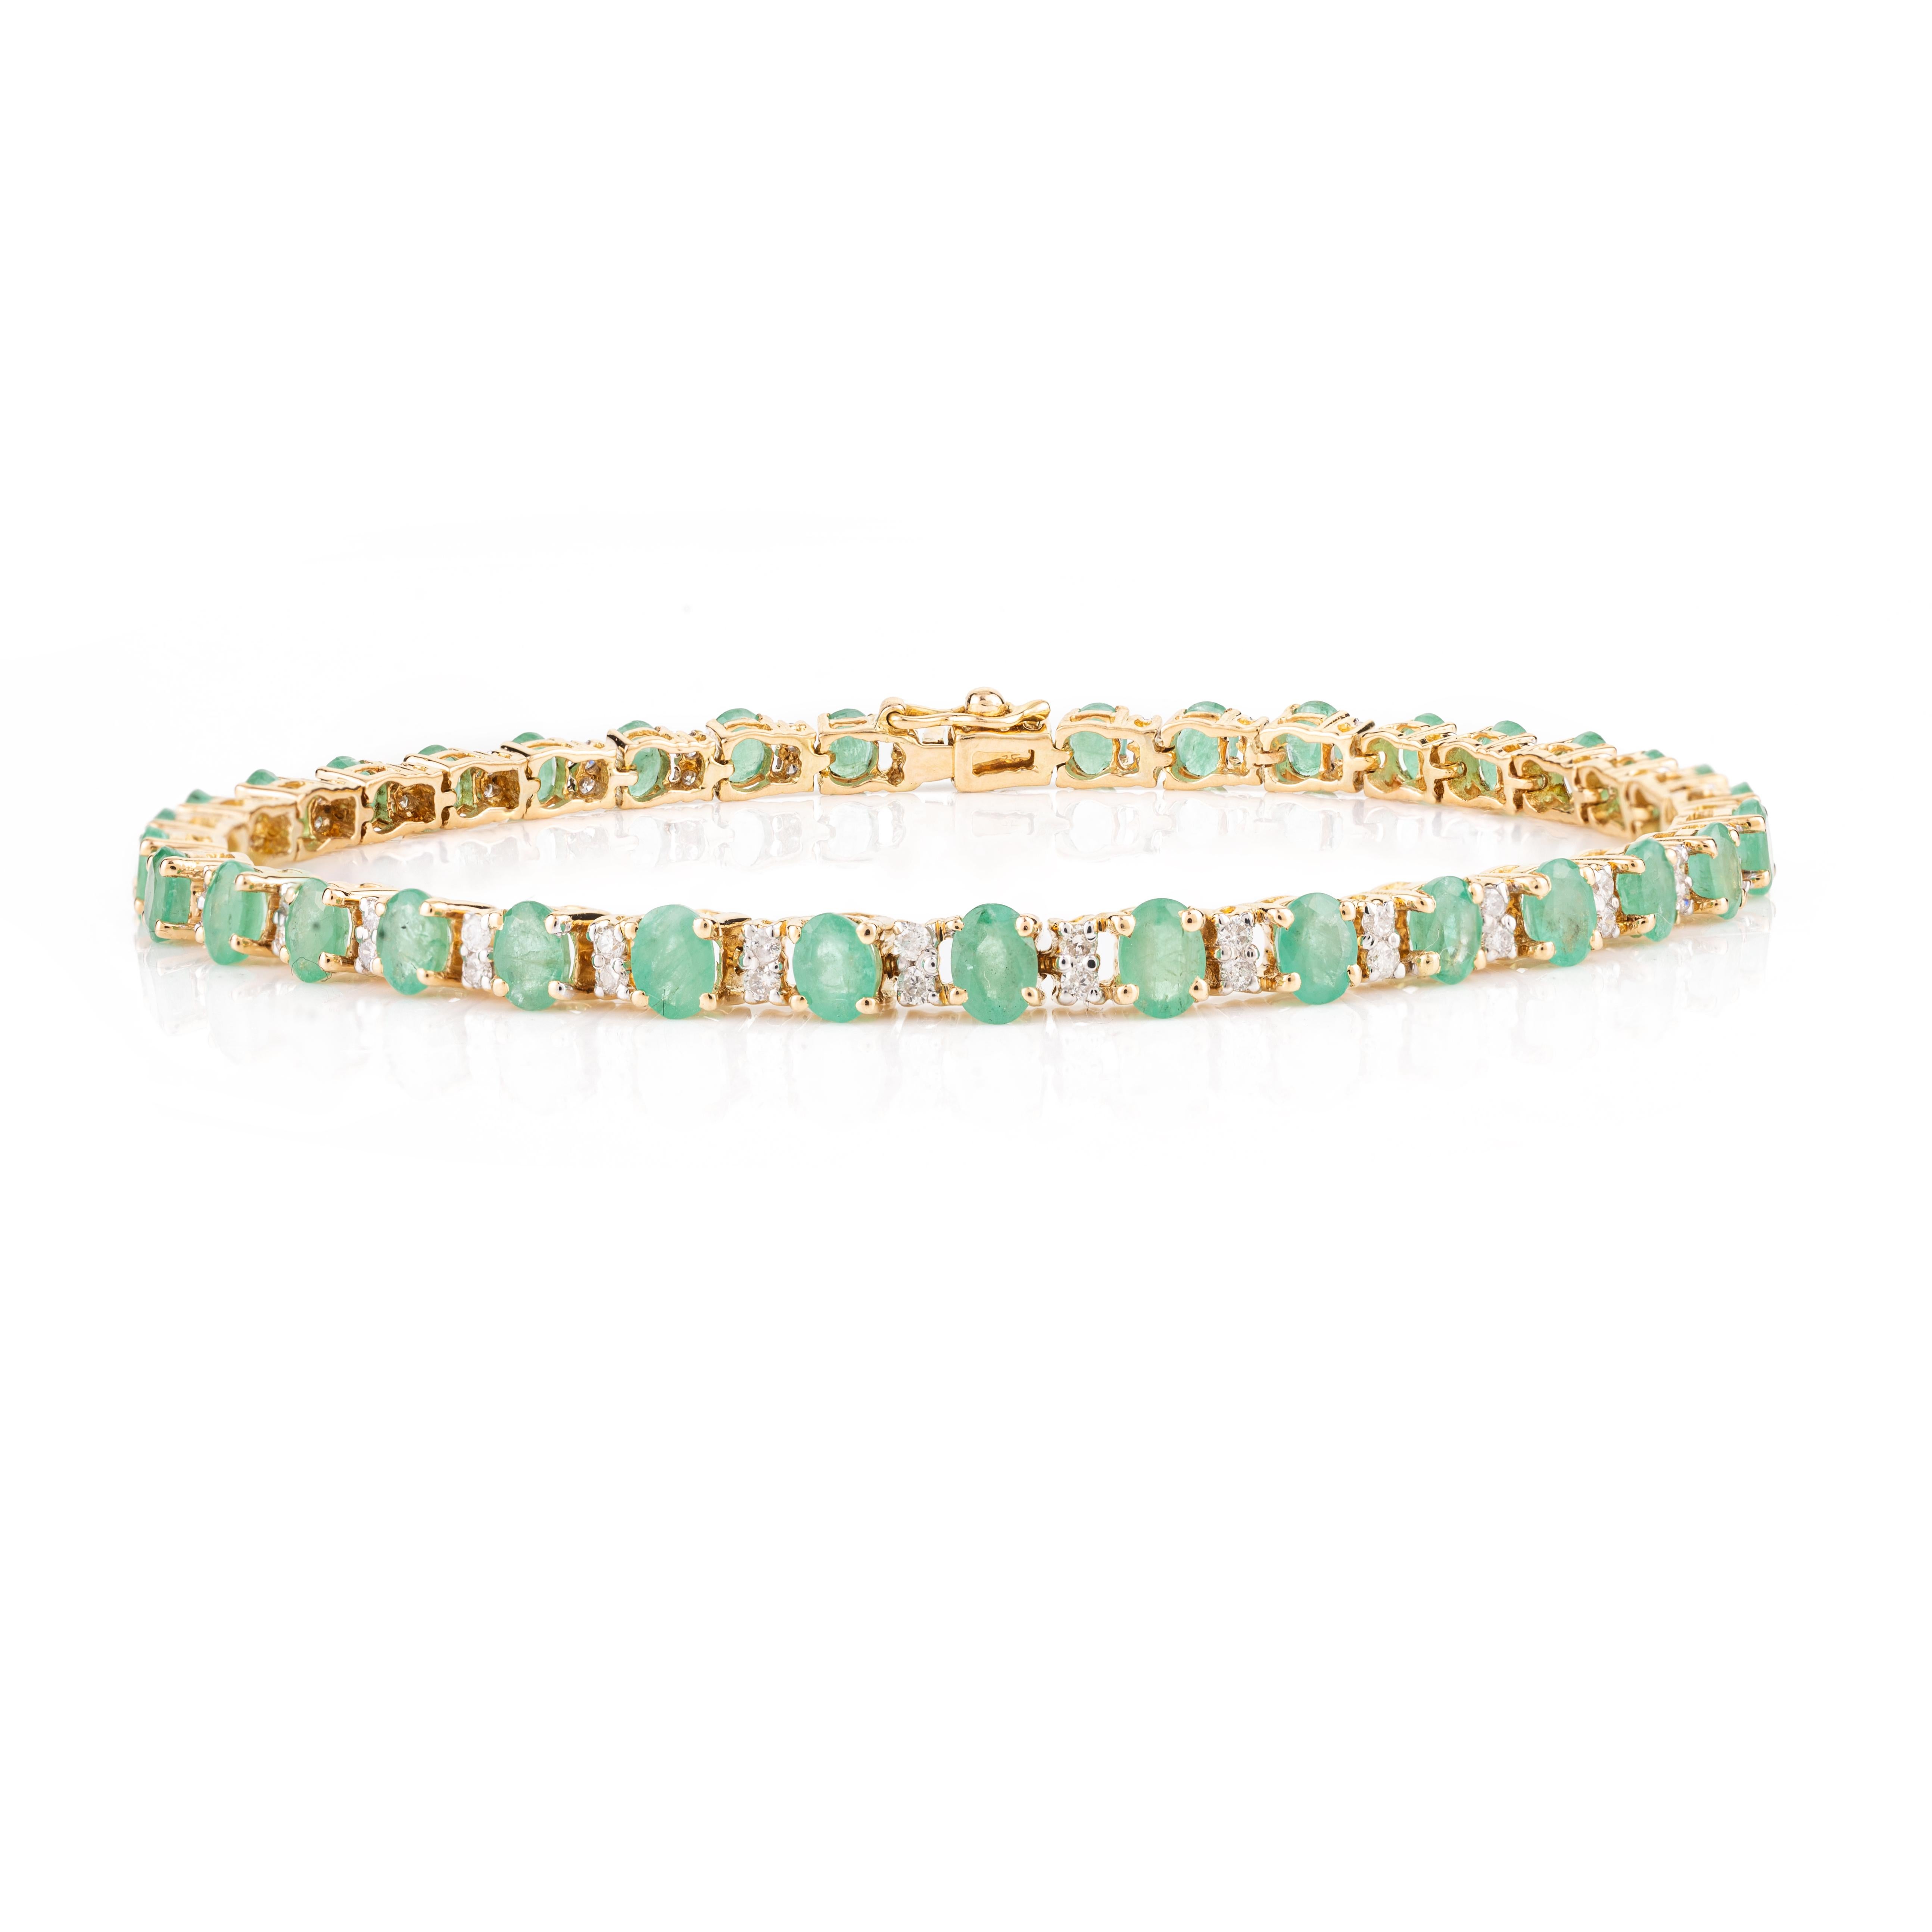 5.68 Carat Oval Cut Emerald and Diamond Tennis Bracelet in 18k Yellow Gold For Sale 2